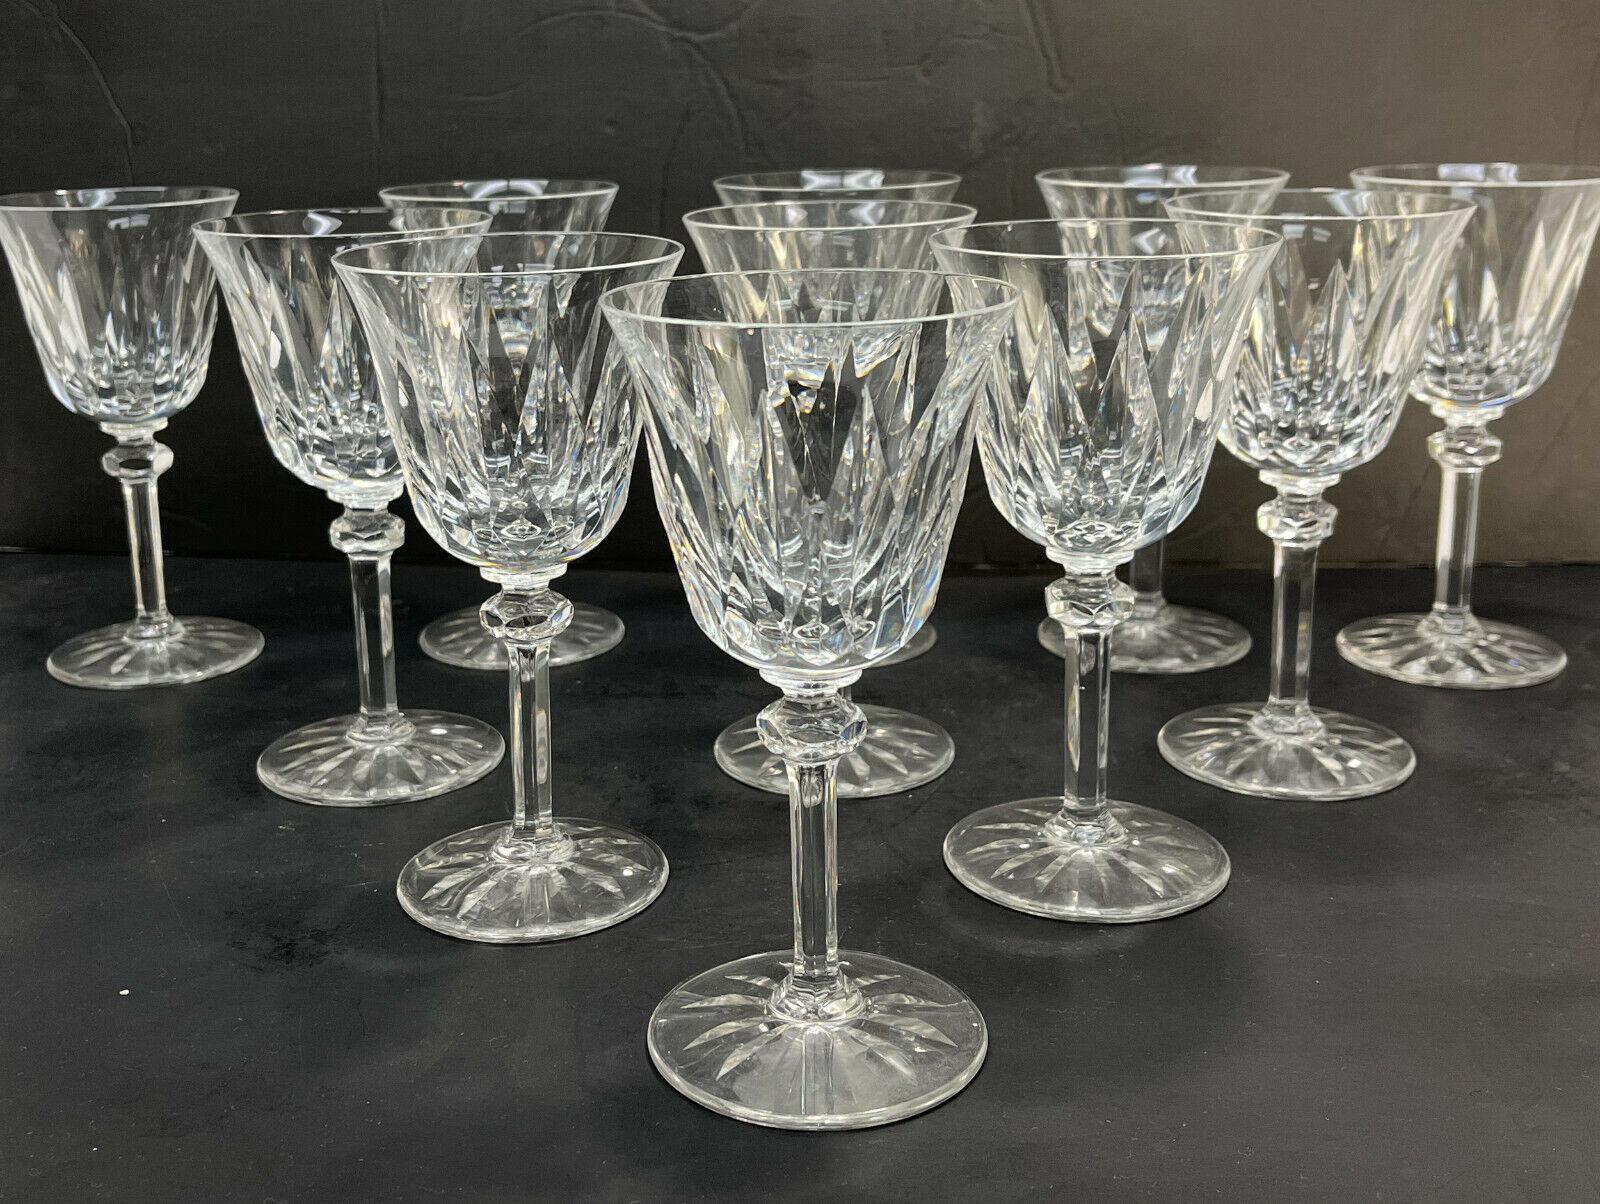  11 St. Louis France glass wine goblets in Provence. Cut vertical design on the bowl with a knob stem. Acid etched St. Louis mark to the underside.

Additional Information: 
Type: Wine Goblets
Weight Approx., 6 lbs
Measures Approx., 3.425 inches